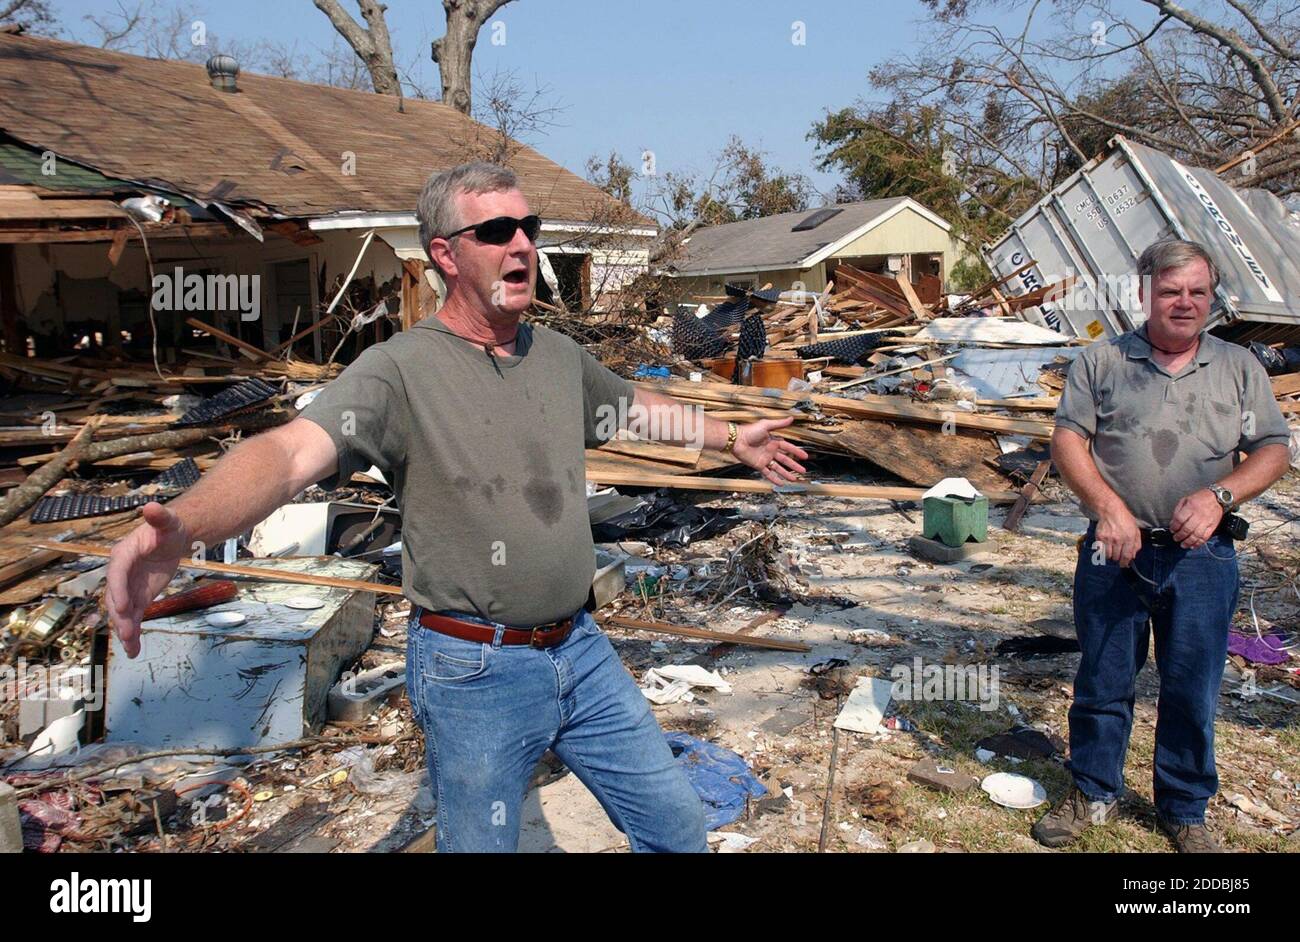 NO FILM, NO VIDEO, NO TV, NO DOCUMENTARY - Gregory R. Pearson (L) and his brother Gary Pearson look through what is left of their mother Mildred Pearson' home in Gulfport, Mississippi, on Sunday morning September 4, 2005. Photo by David Purdy/Biloxi Sun Herald/KRT/ABACAPRESS.COM Stock Photo